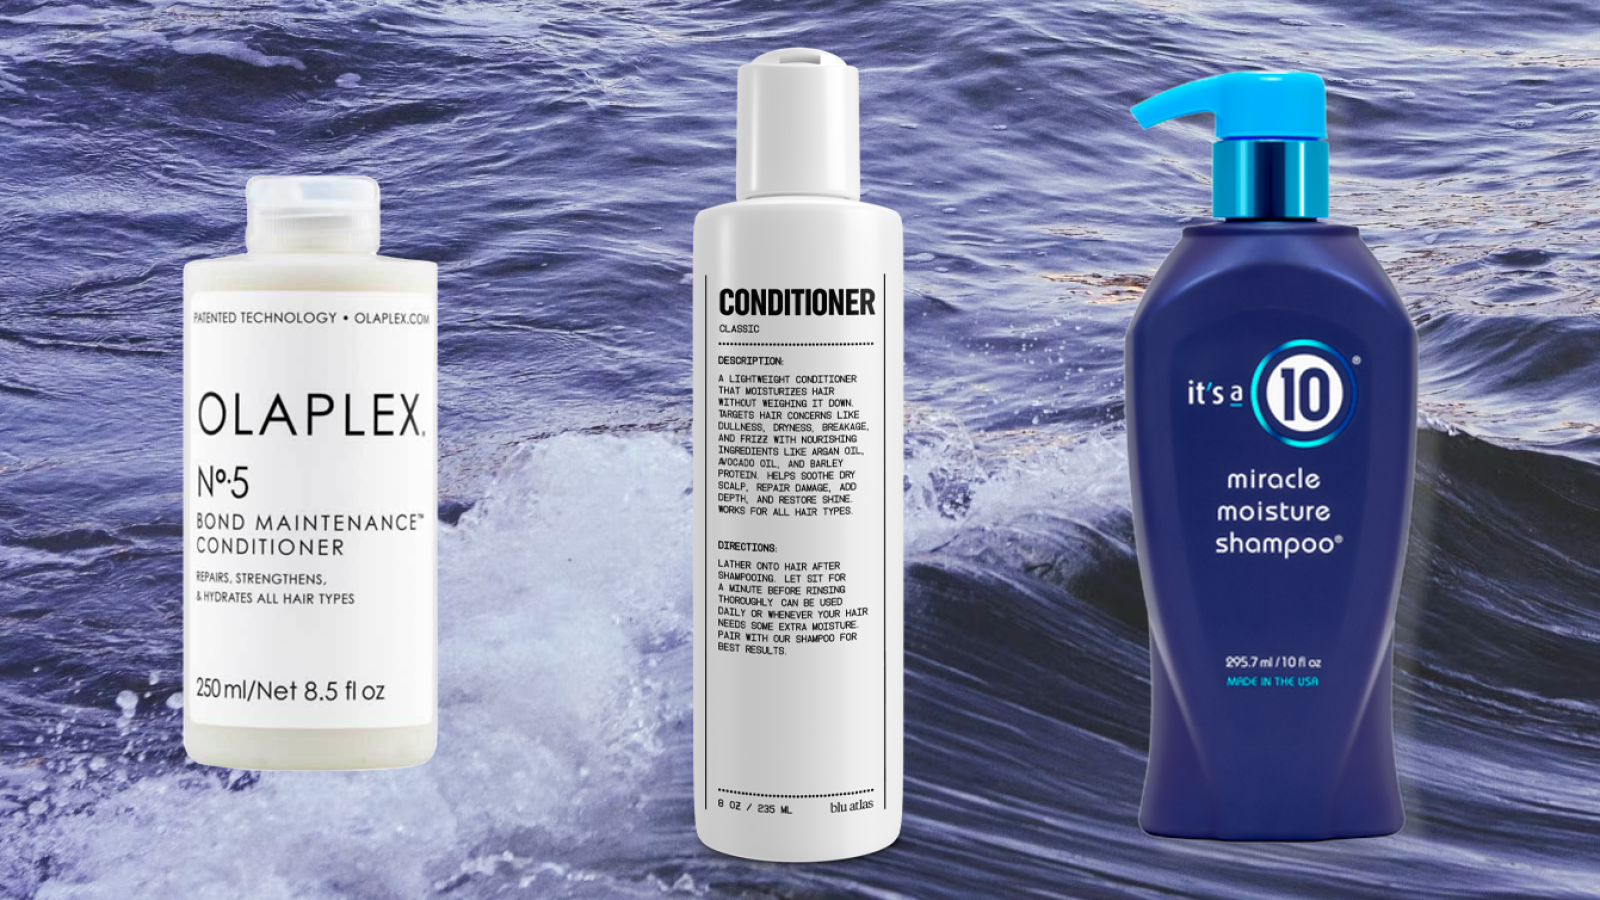 It's a 10 Miracle Shampoo, Conditioner, Leave-In Conditioner and Hair Mask  (Set of 4)